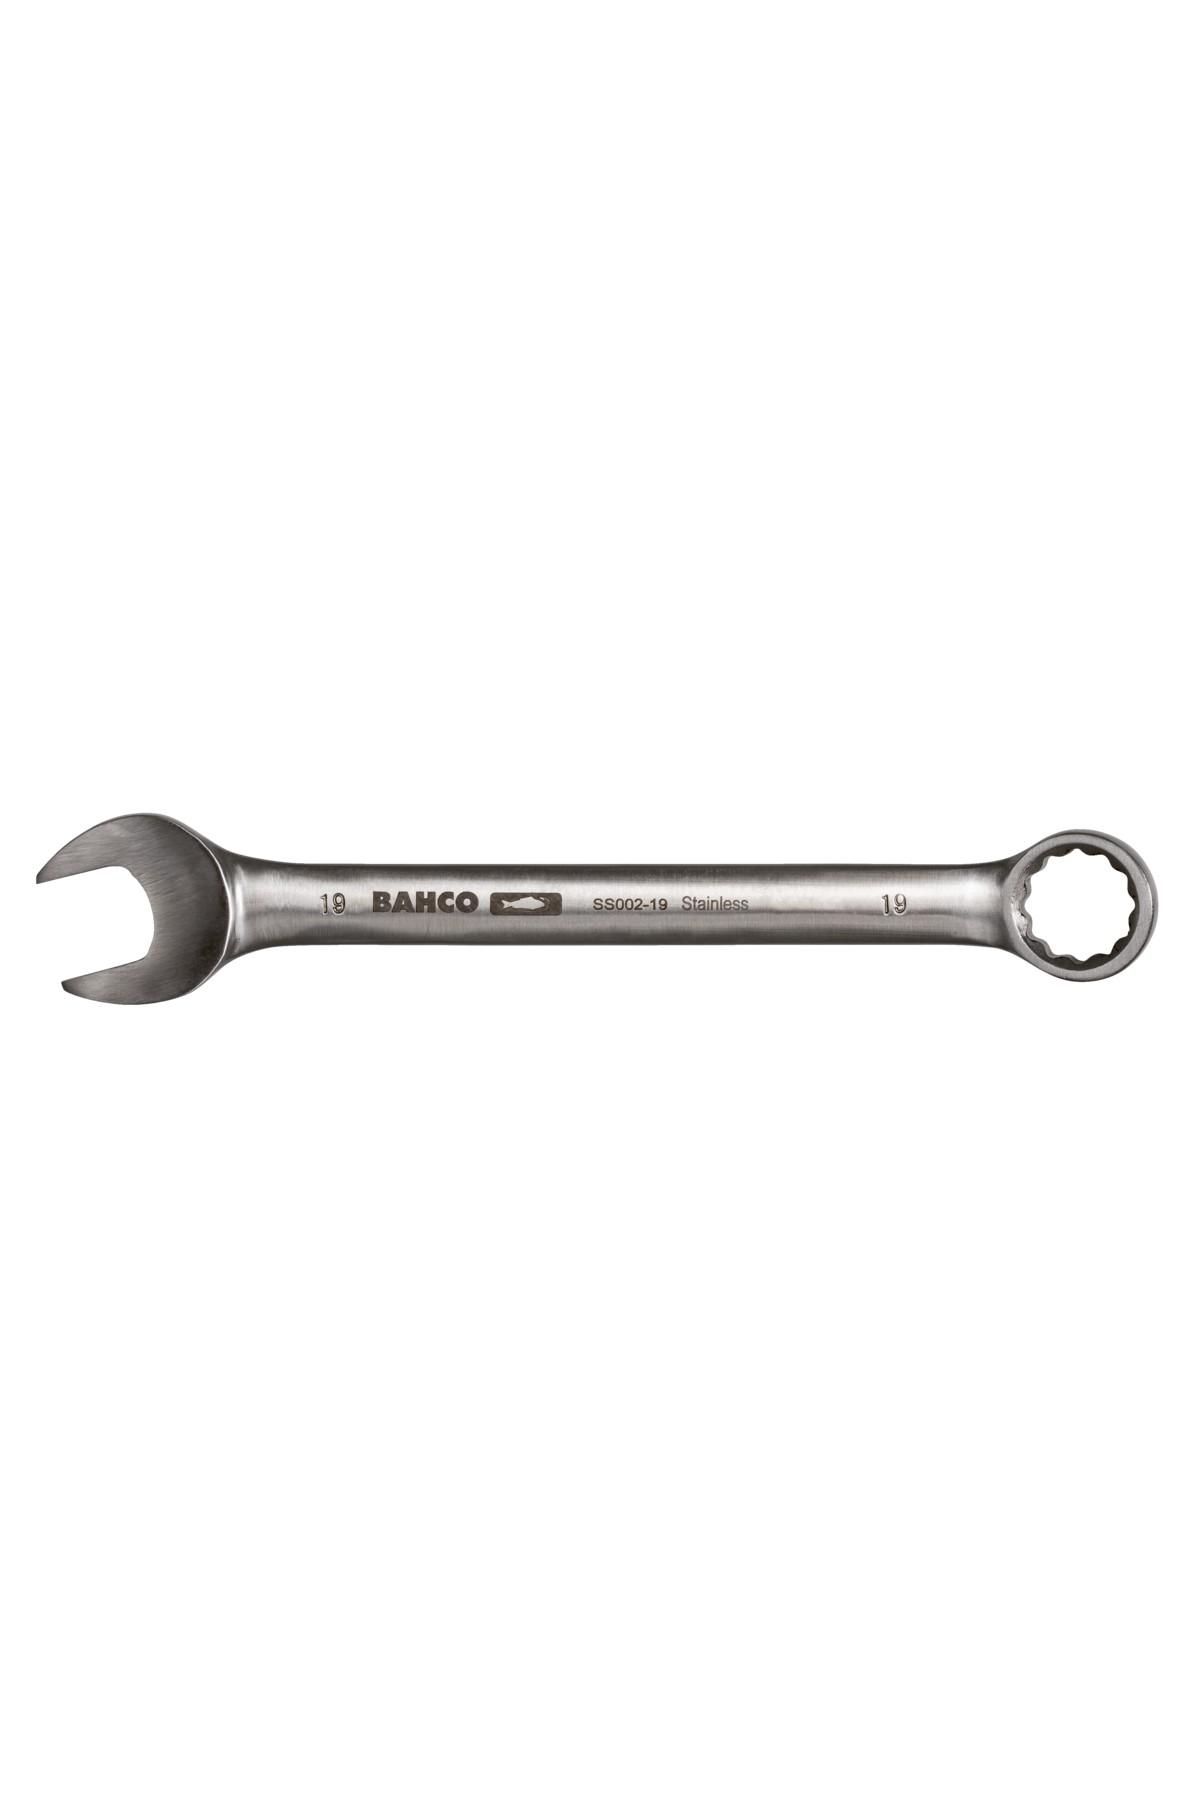 Ring spanner stainless 14mm